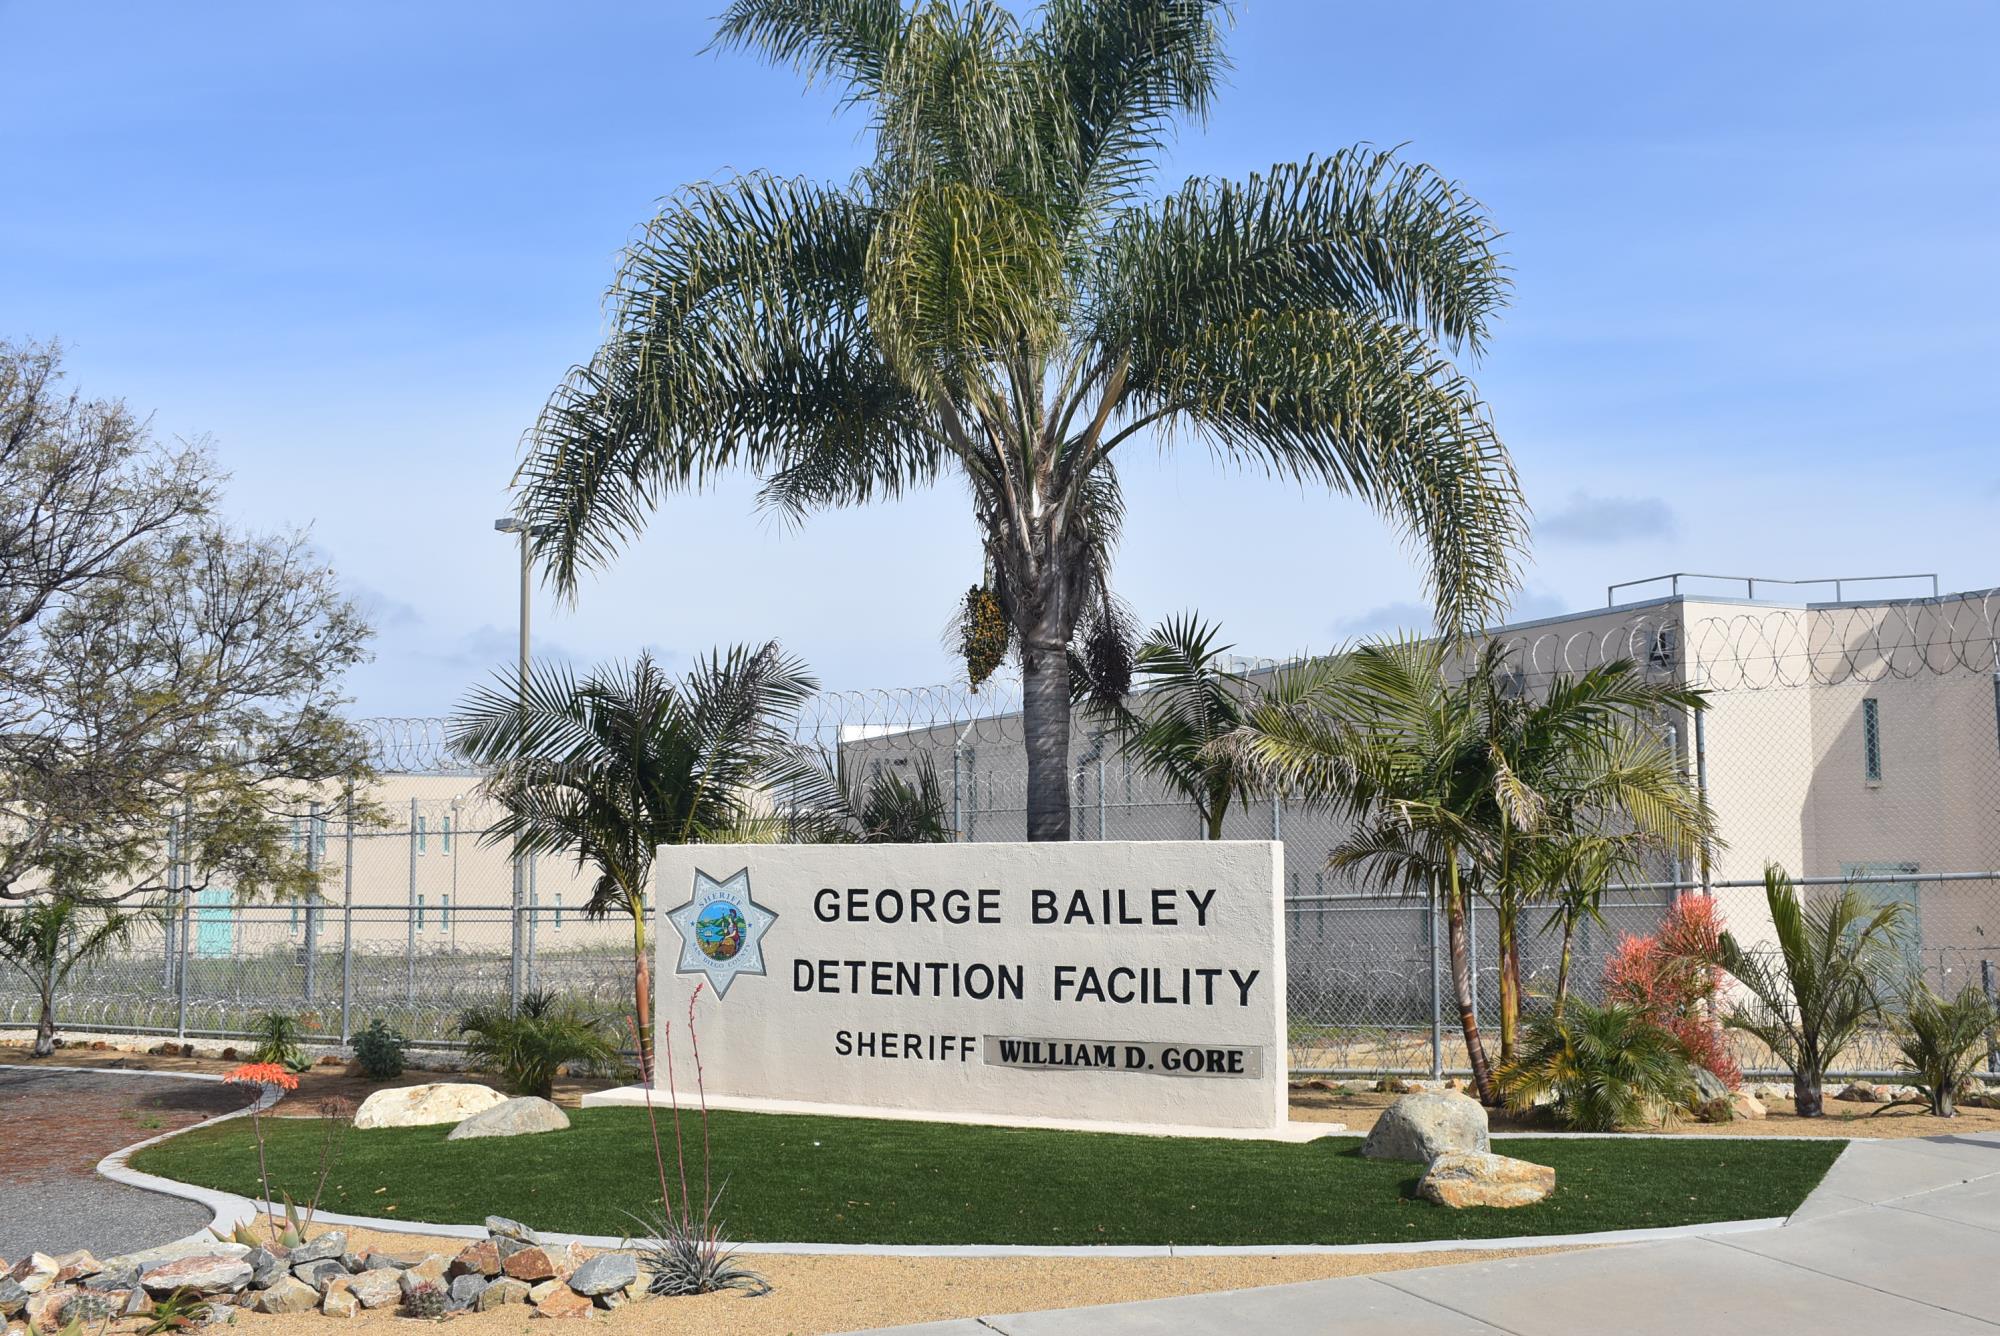 George Bailey Detention Facility